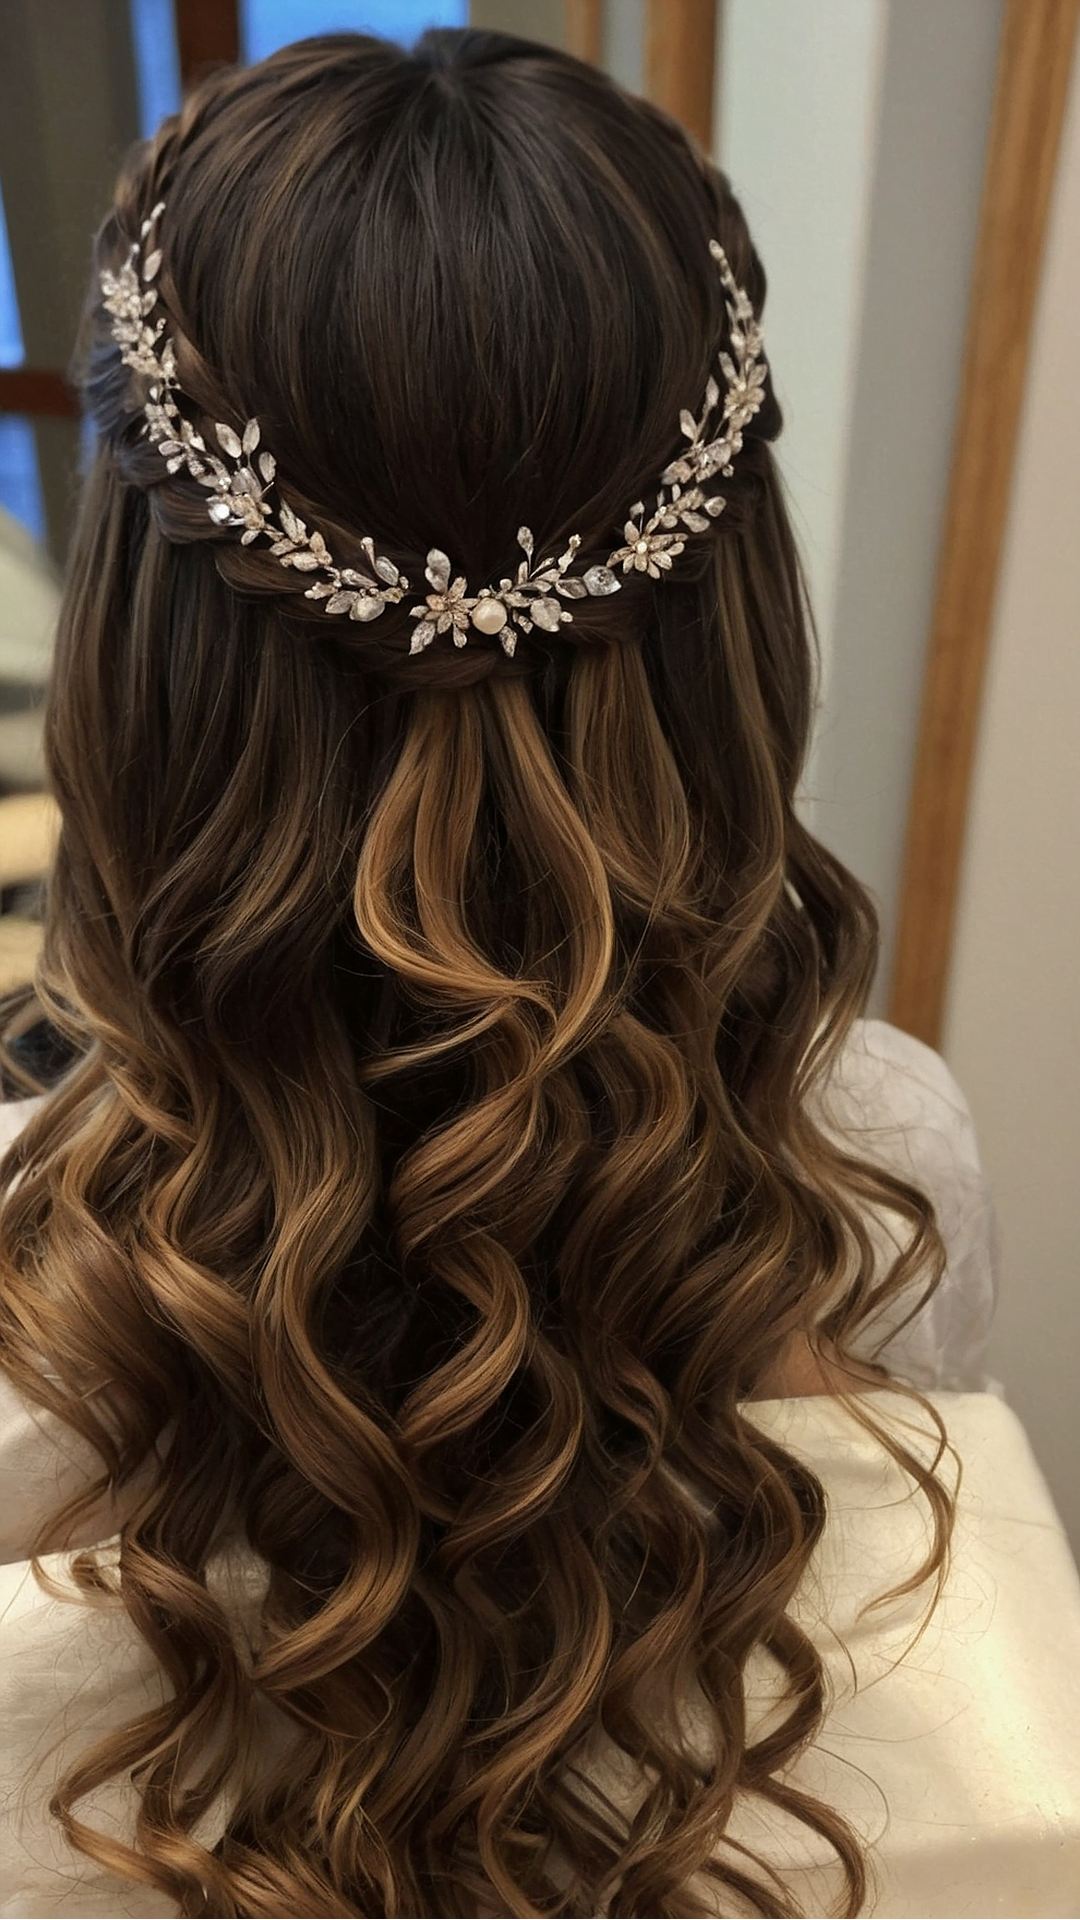 Sleek Straight Look with Adorable Hairpiece for Prom